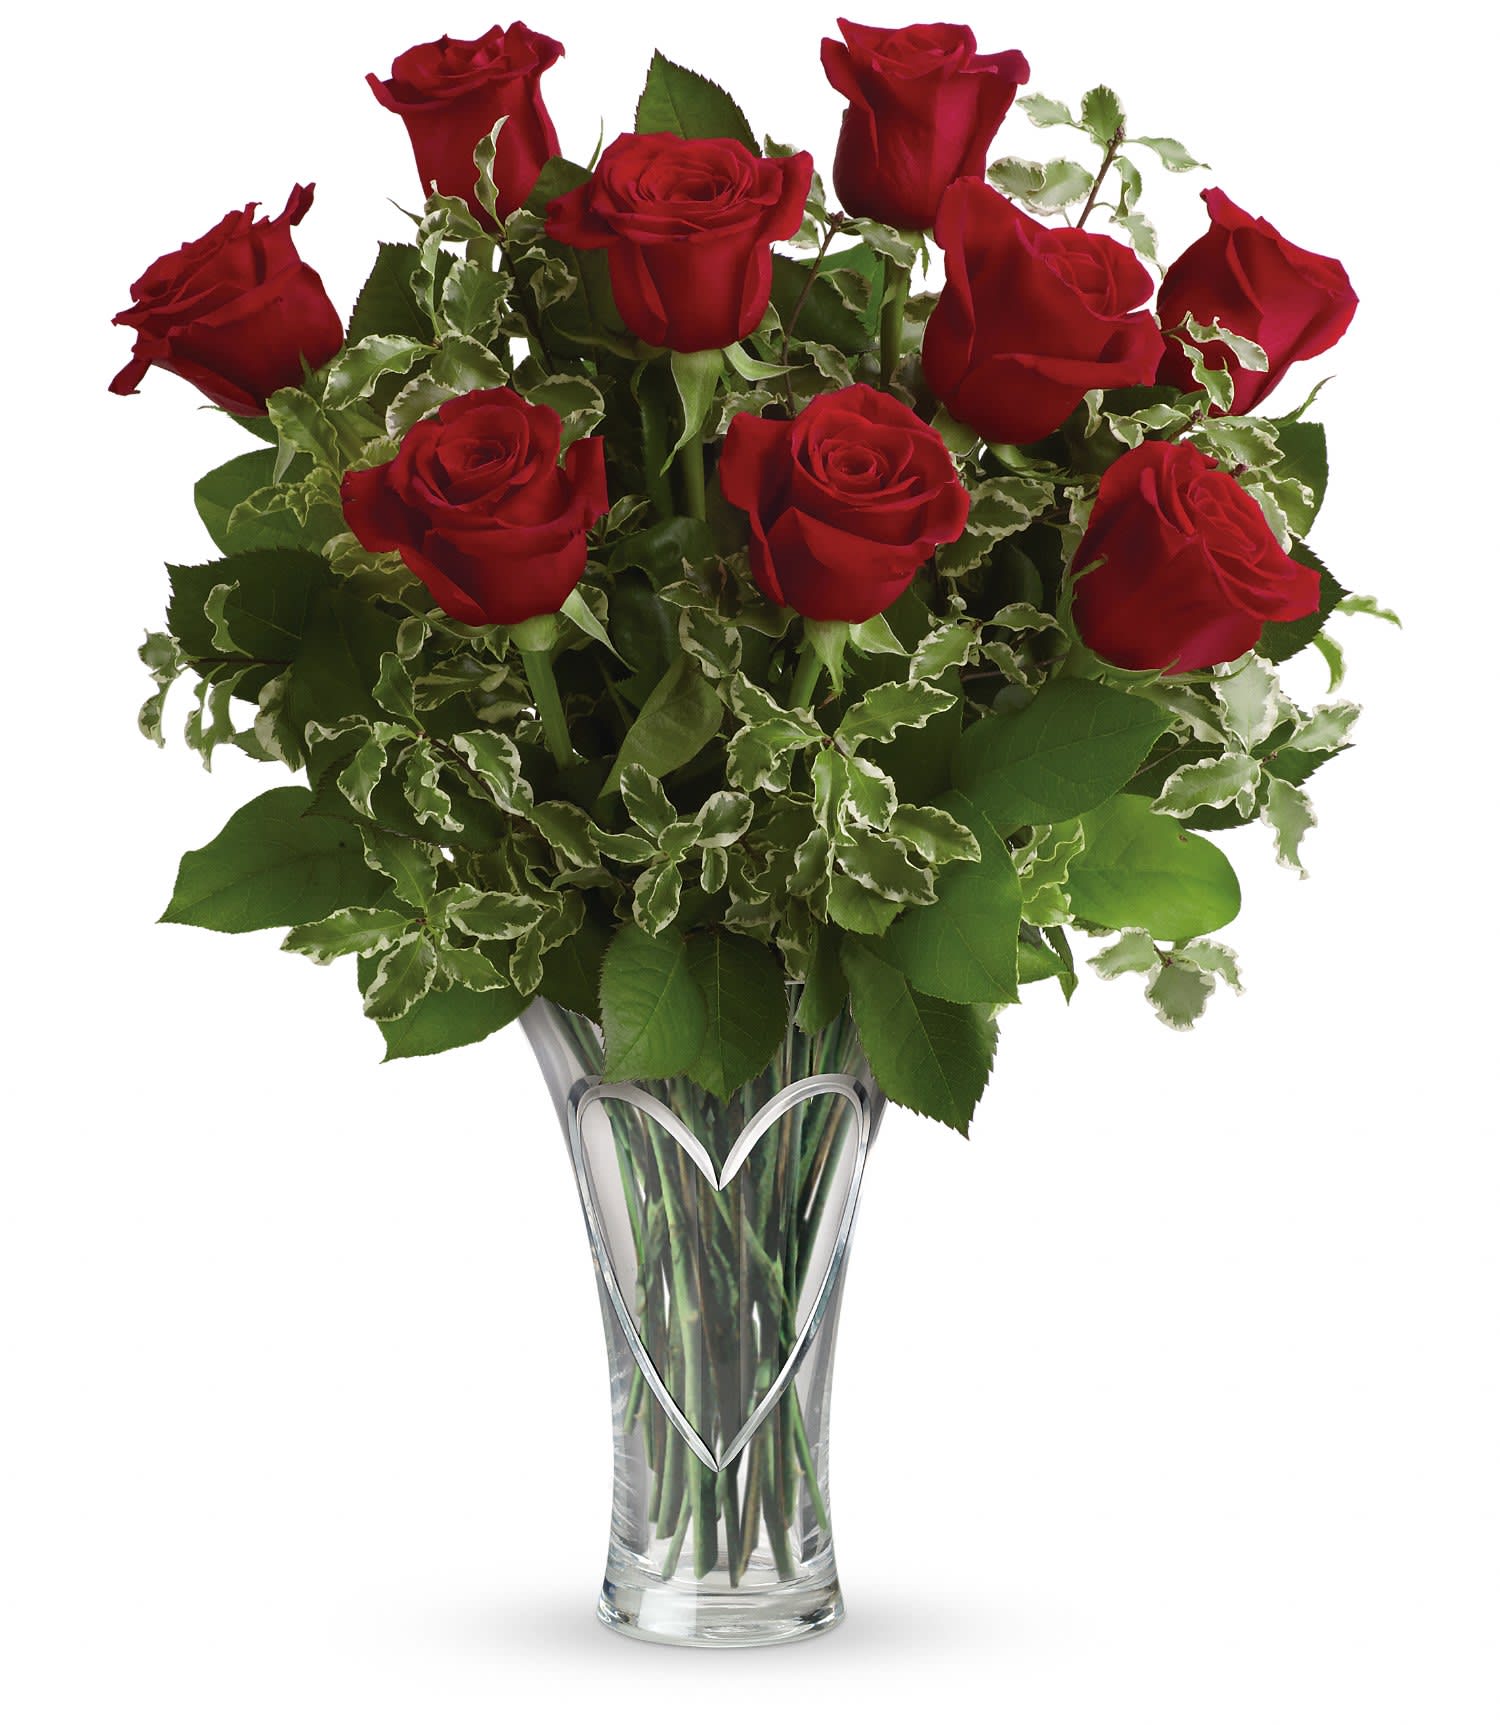 You Have My Heart Bouquet by Teleflora DXYou Have My Heart Bouquet by Teleflora DX - Romance 101! Classic red roses, fresh greens and a fabulous limited-edition, hand-cut keepsake glass vase are the surest way to capture even more of her heart this Valentine's Day. 